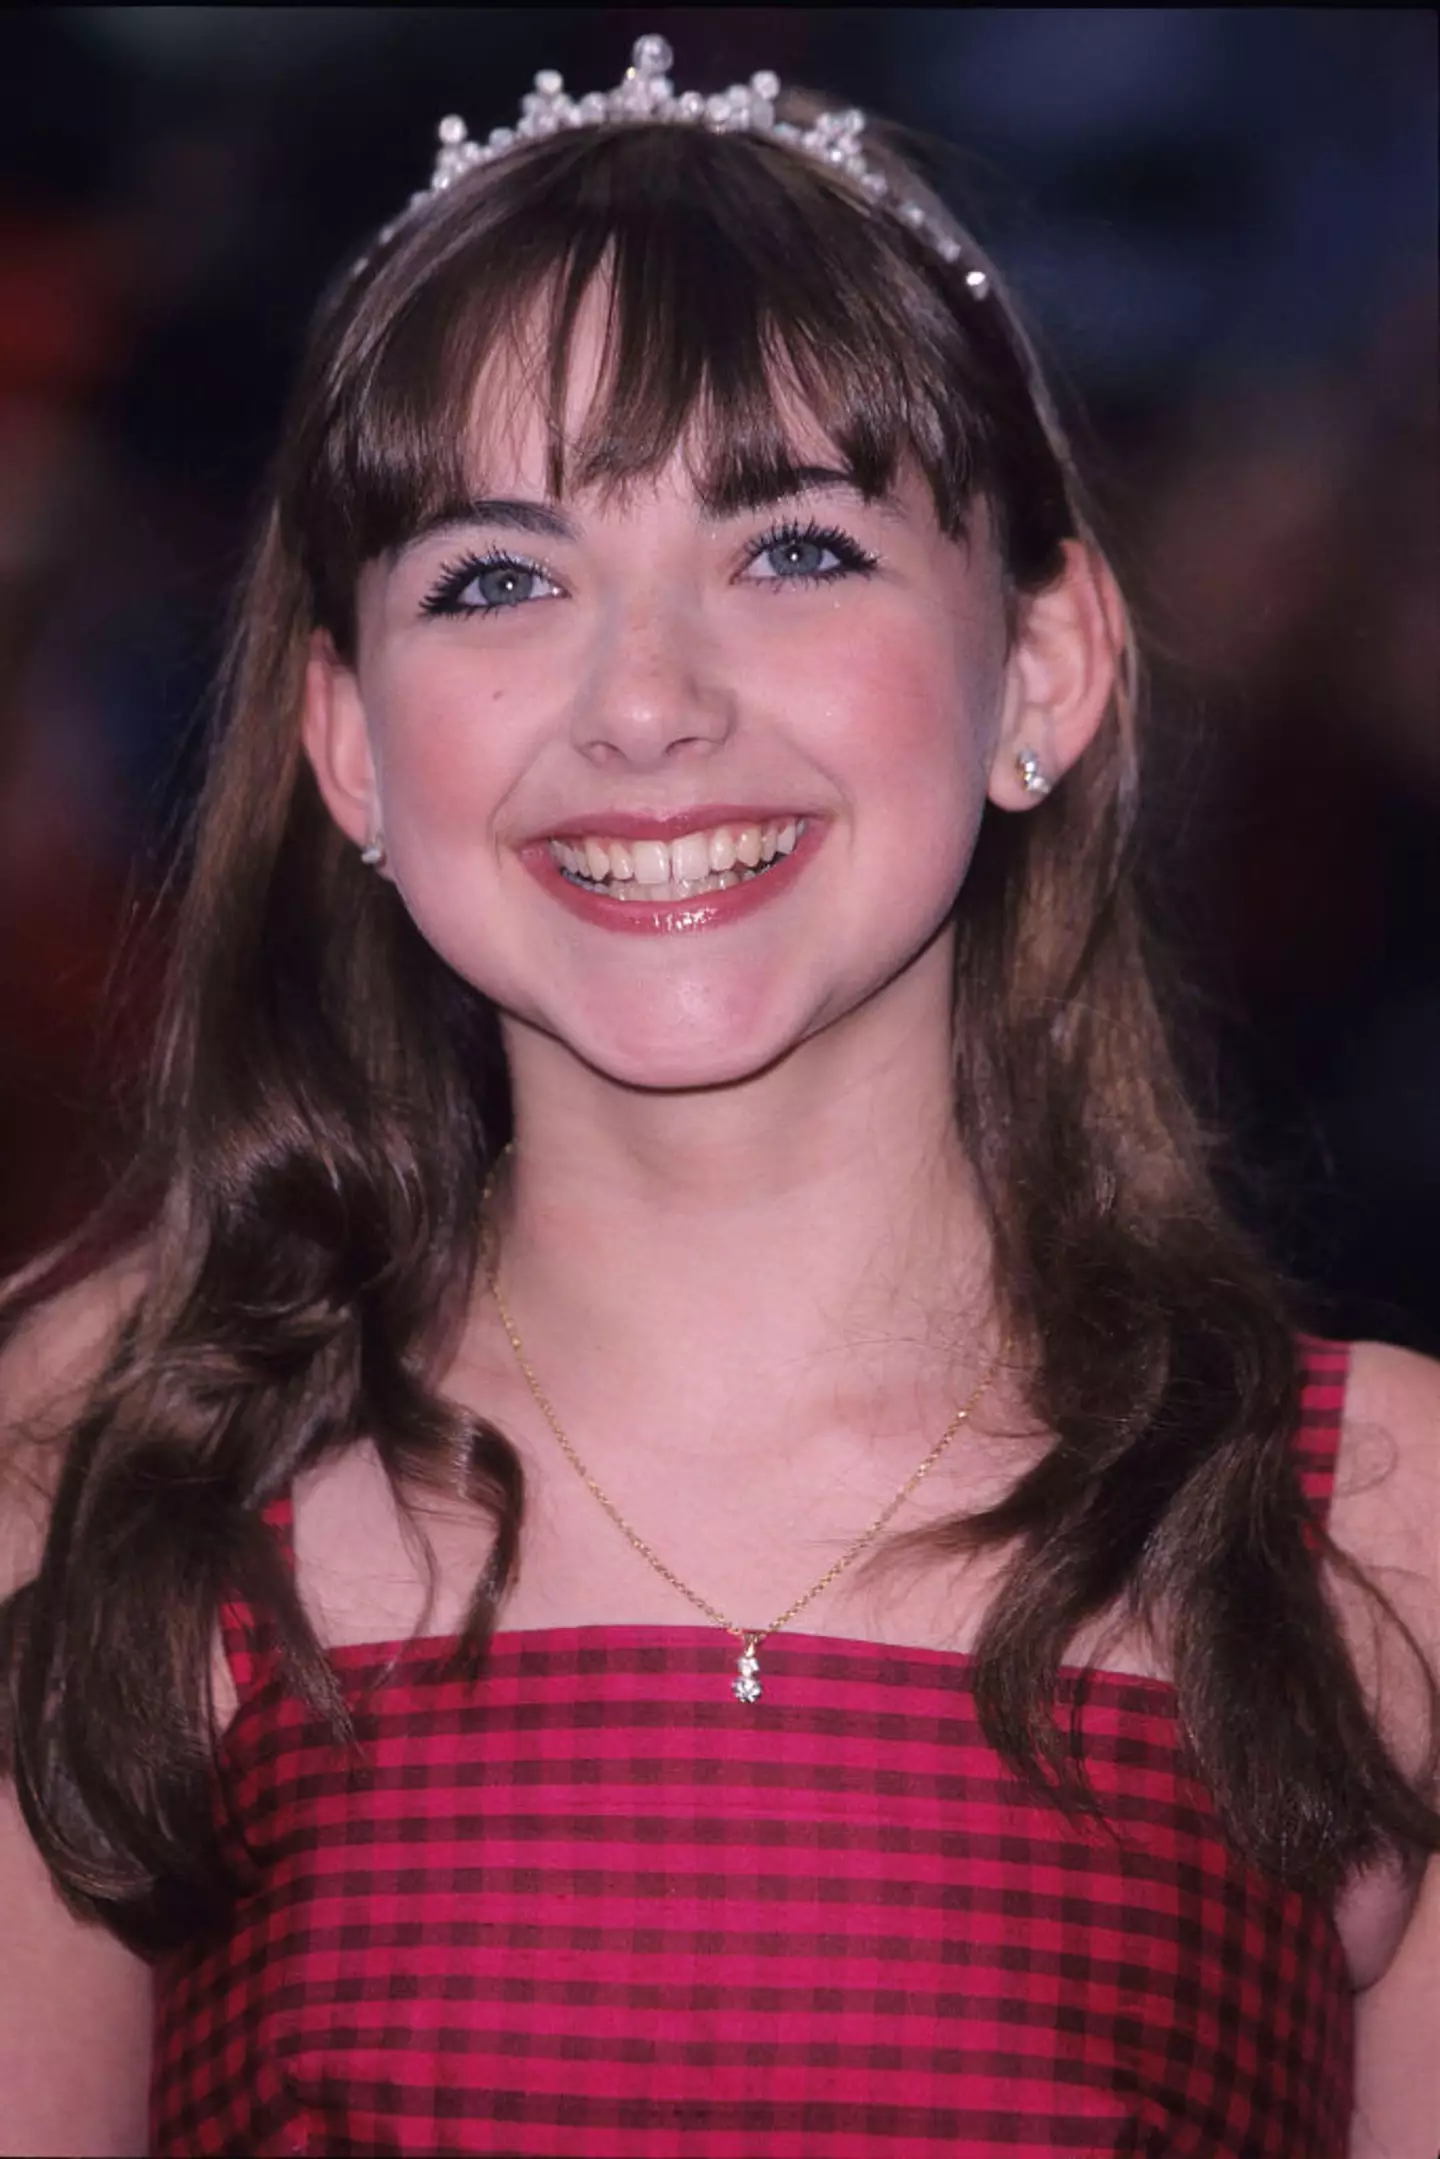 Charlotte rose to fame at 11. (Fred Duval/FilmMagic)